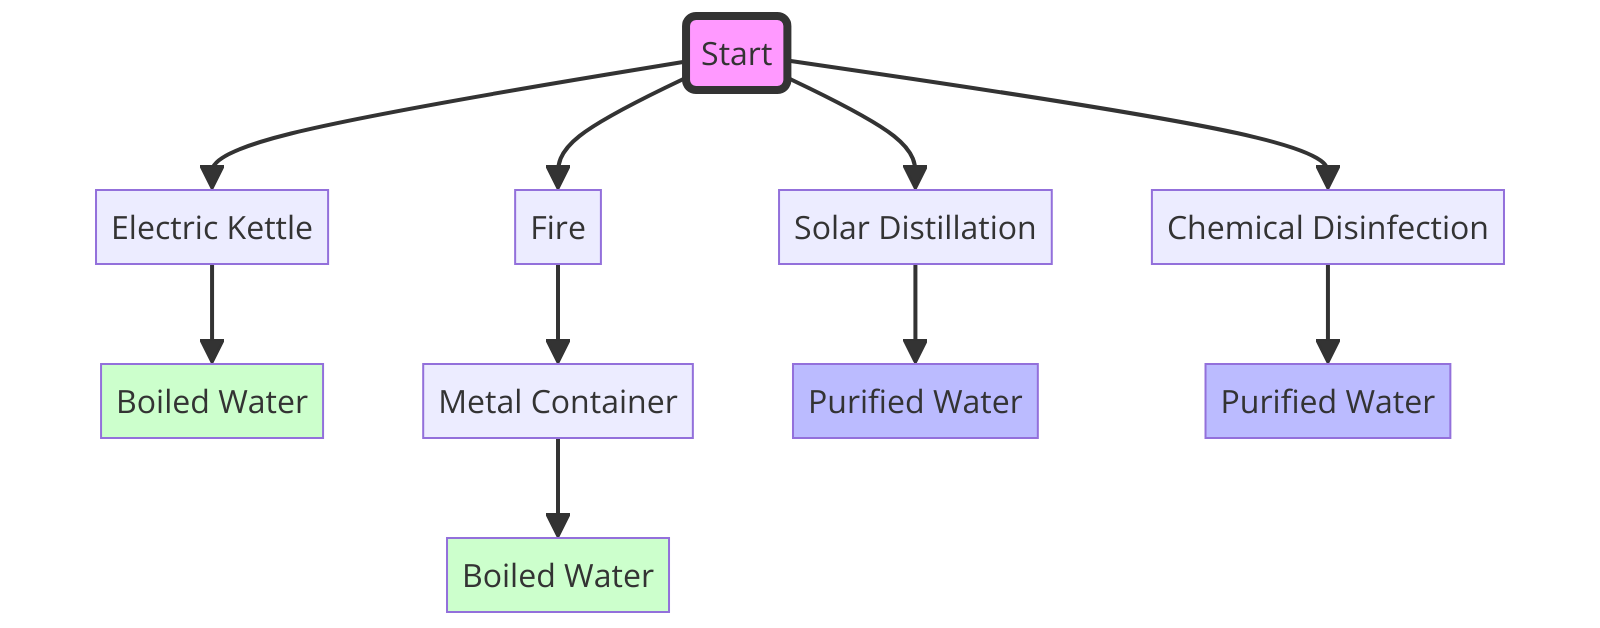 different methods to boil water using urban resources